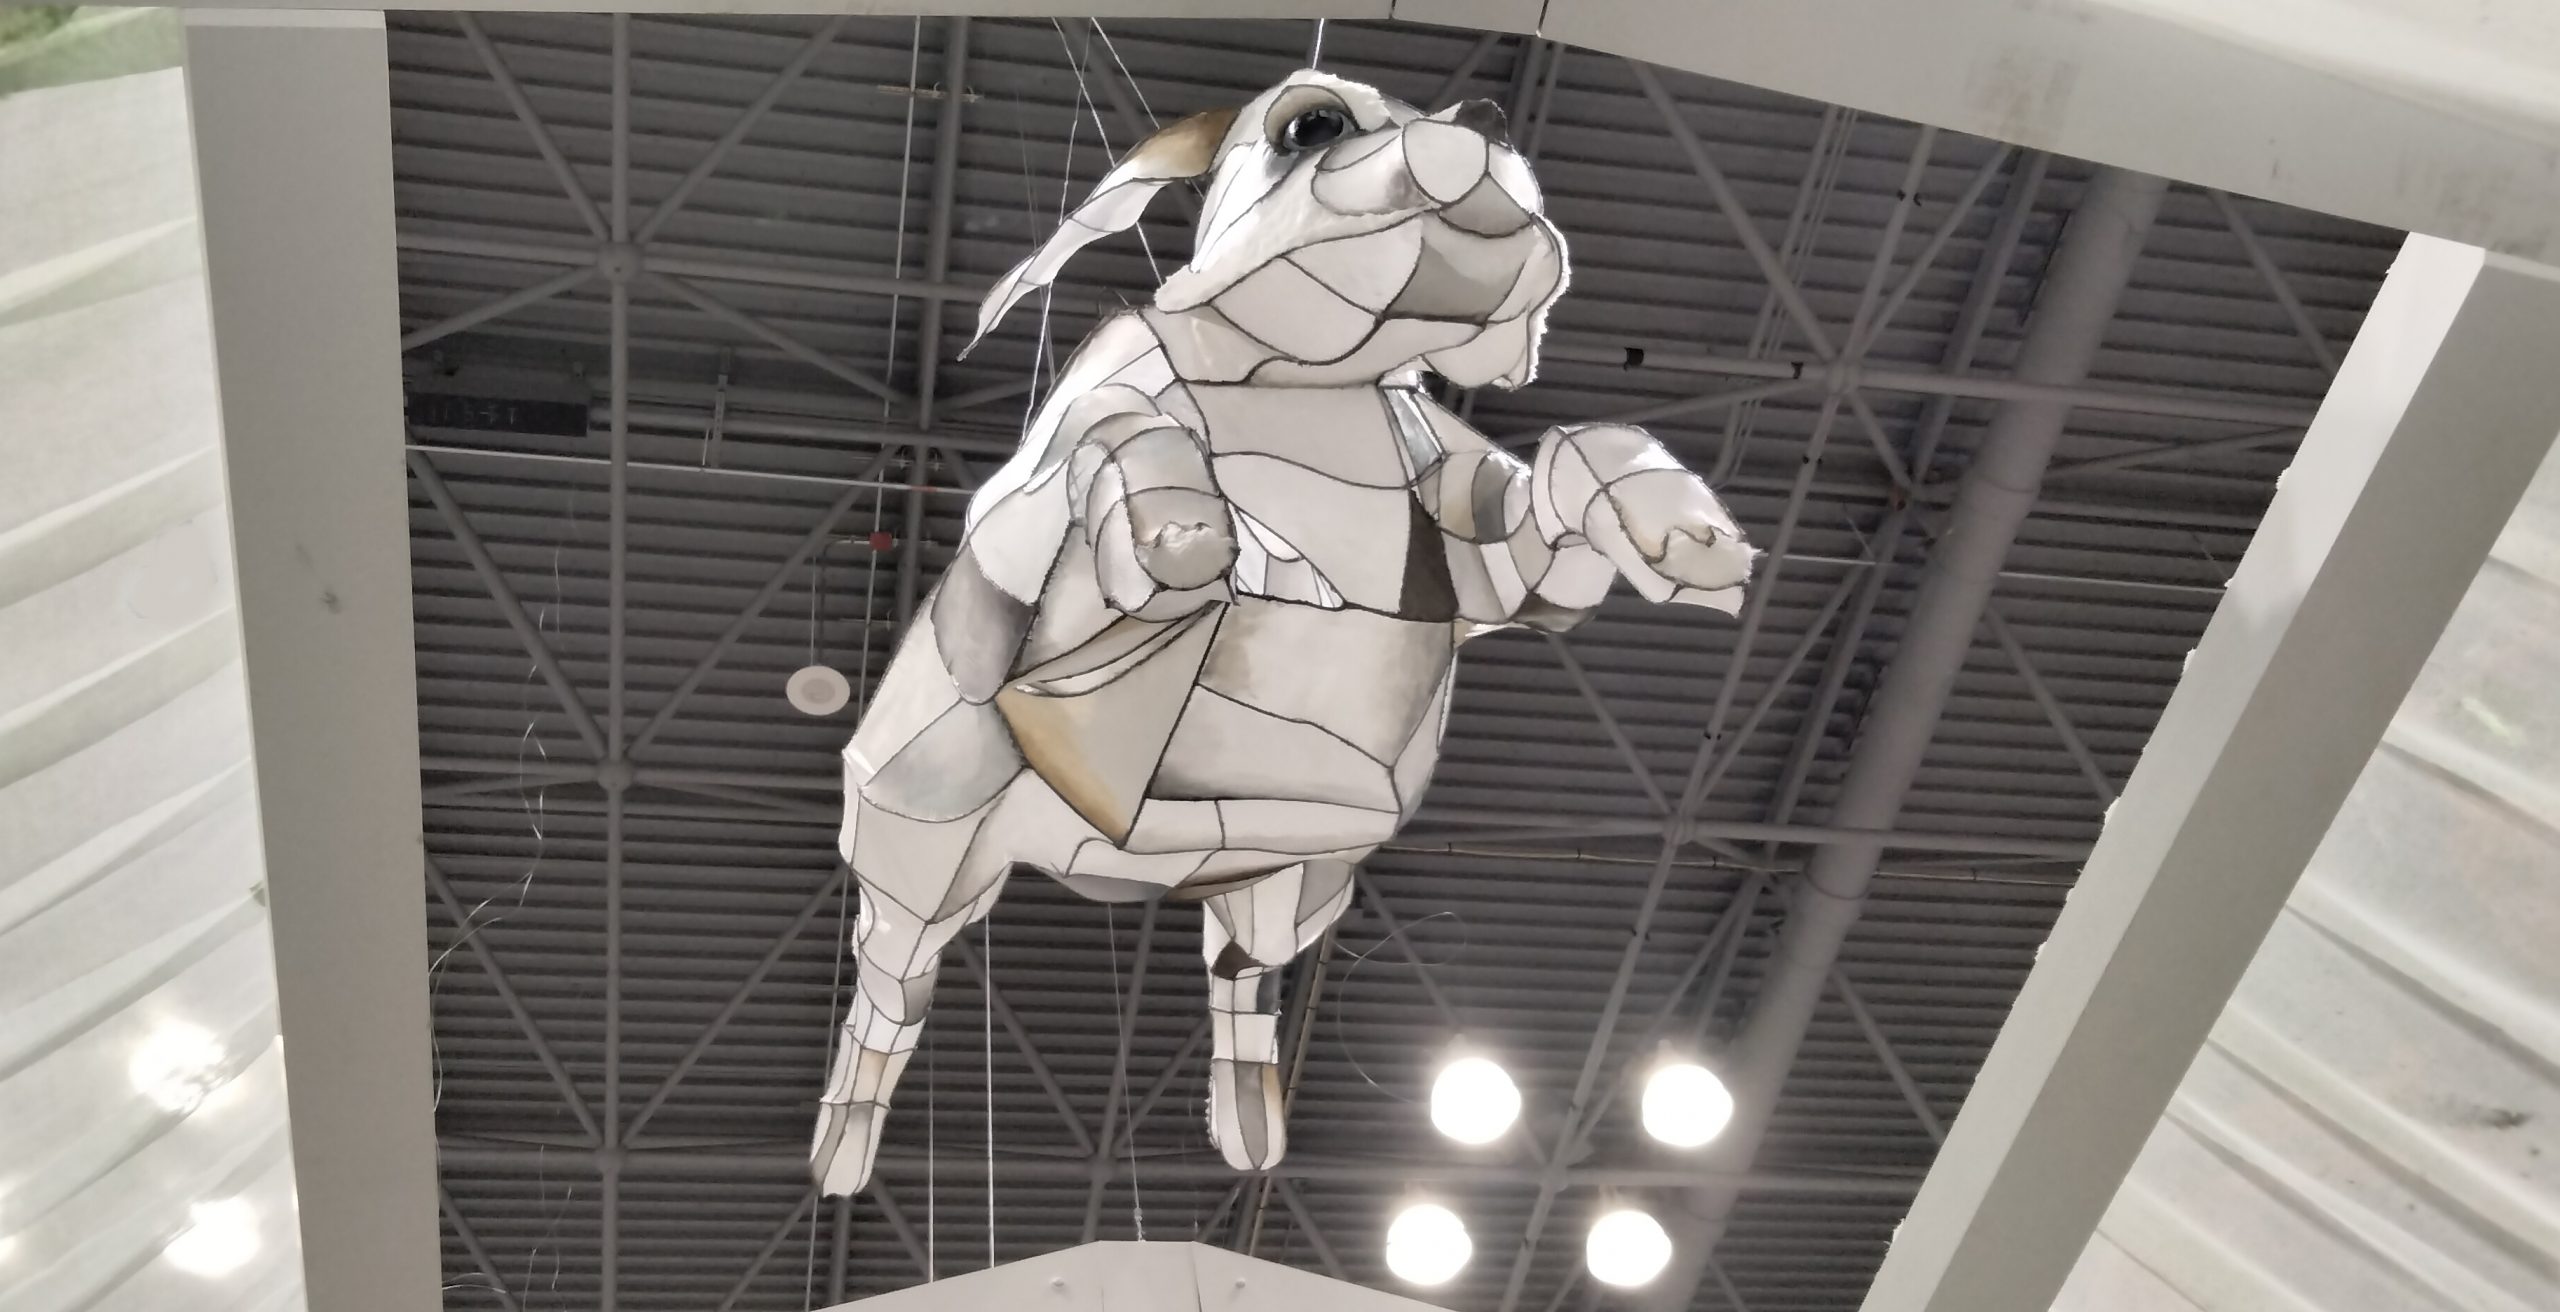 White Rabbit- Created for a Boutique Design Convention at the Javits Convention Center.